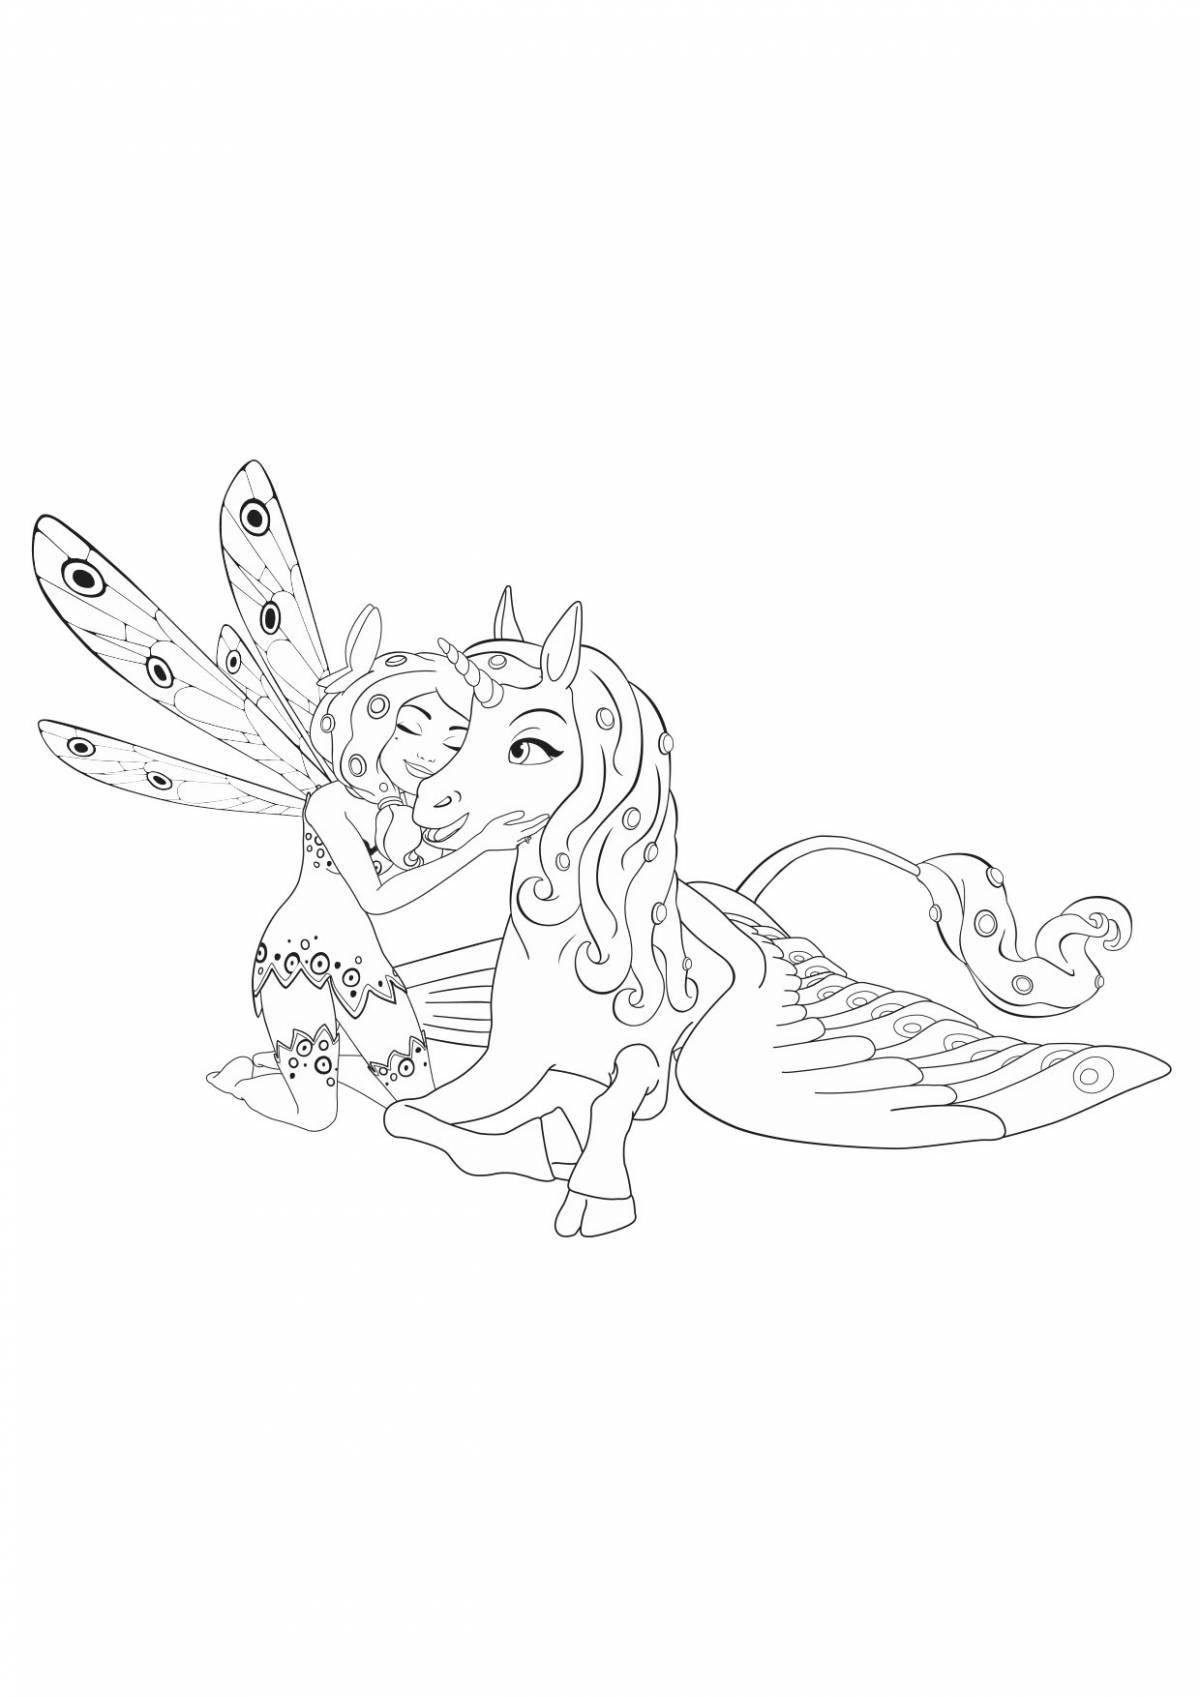 Animated incantimals coloring page